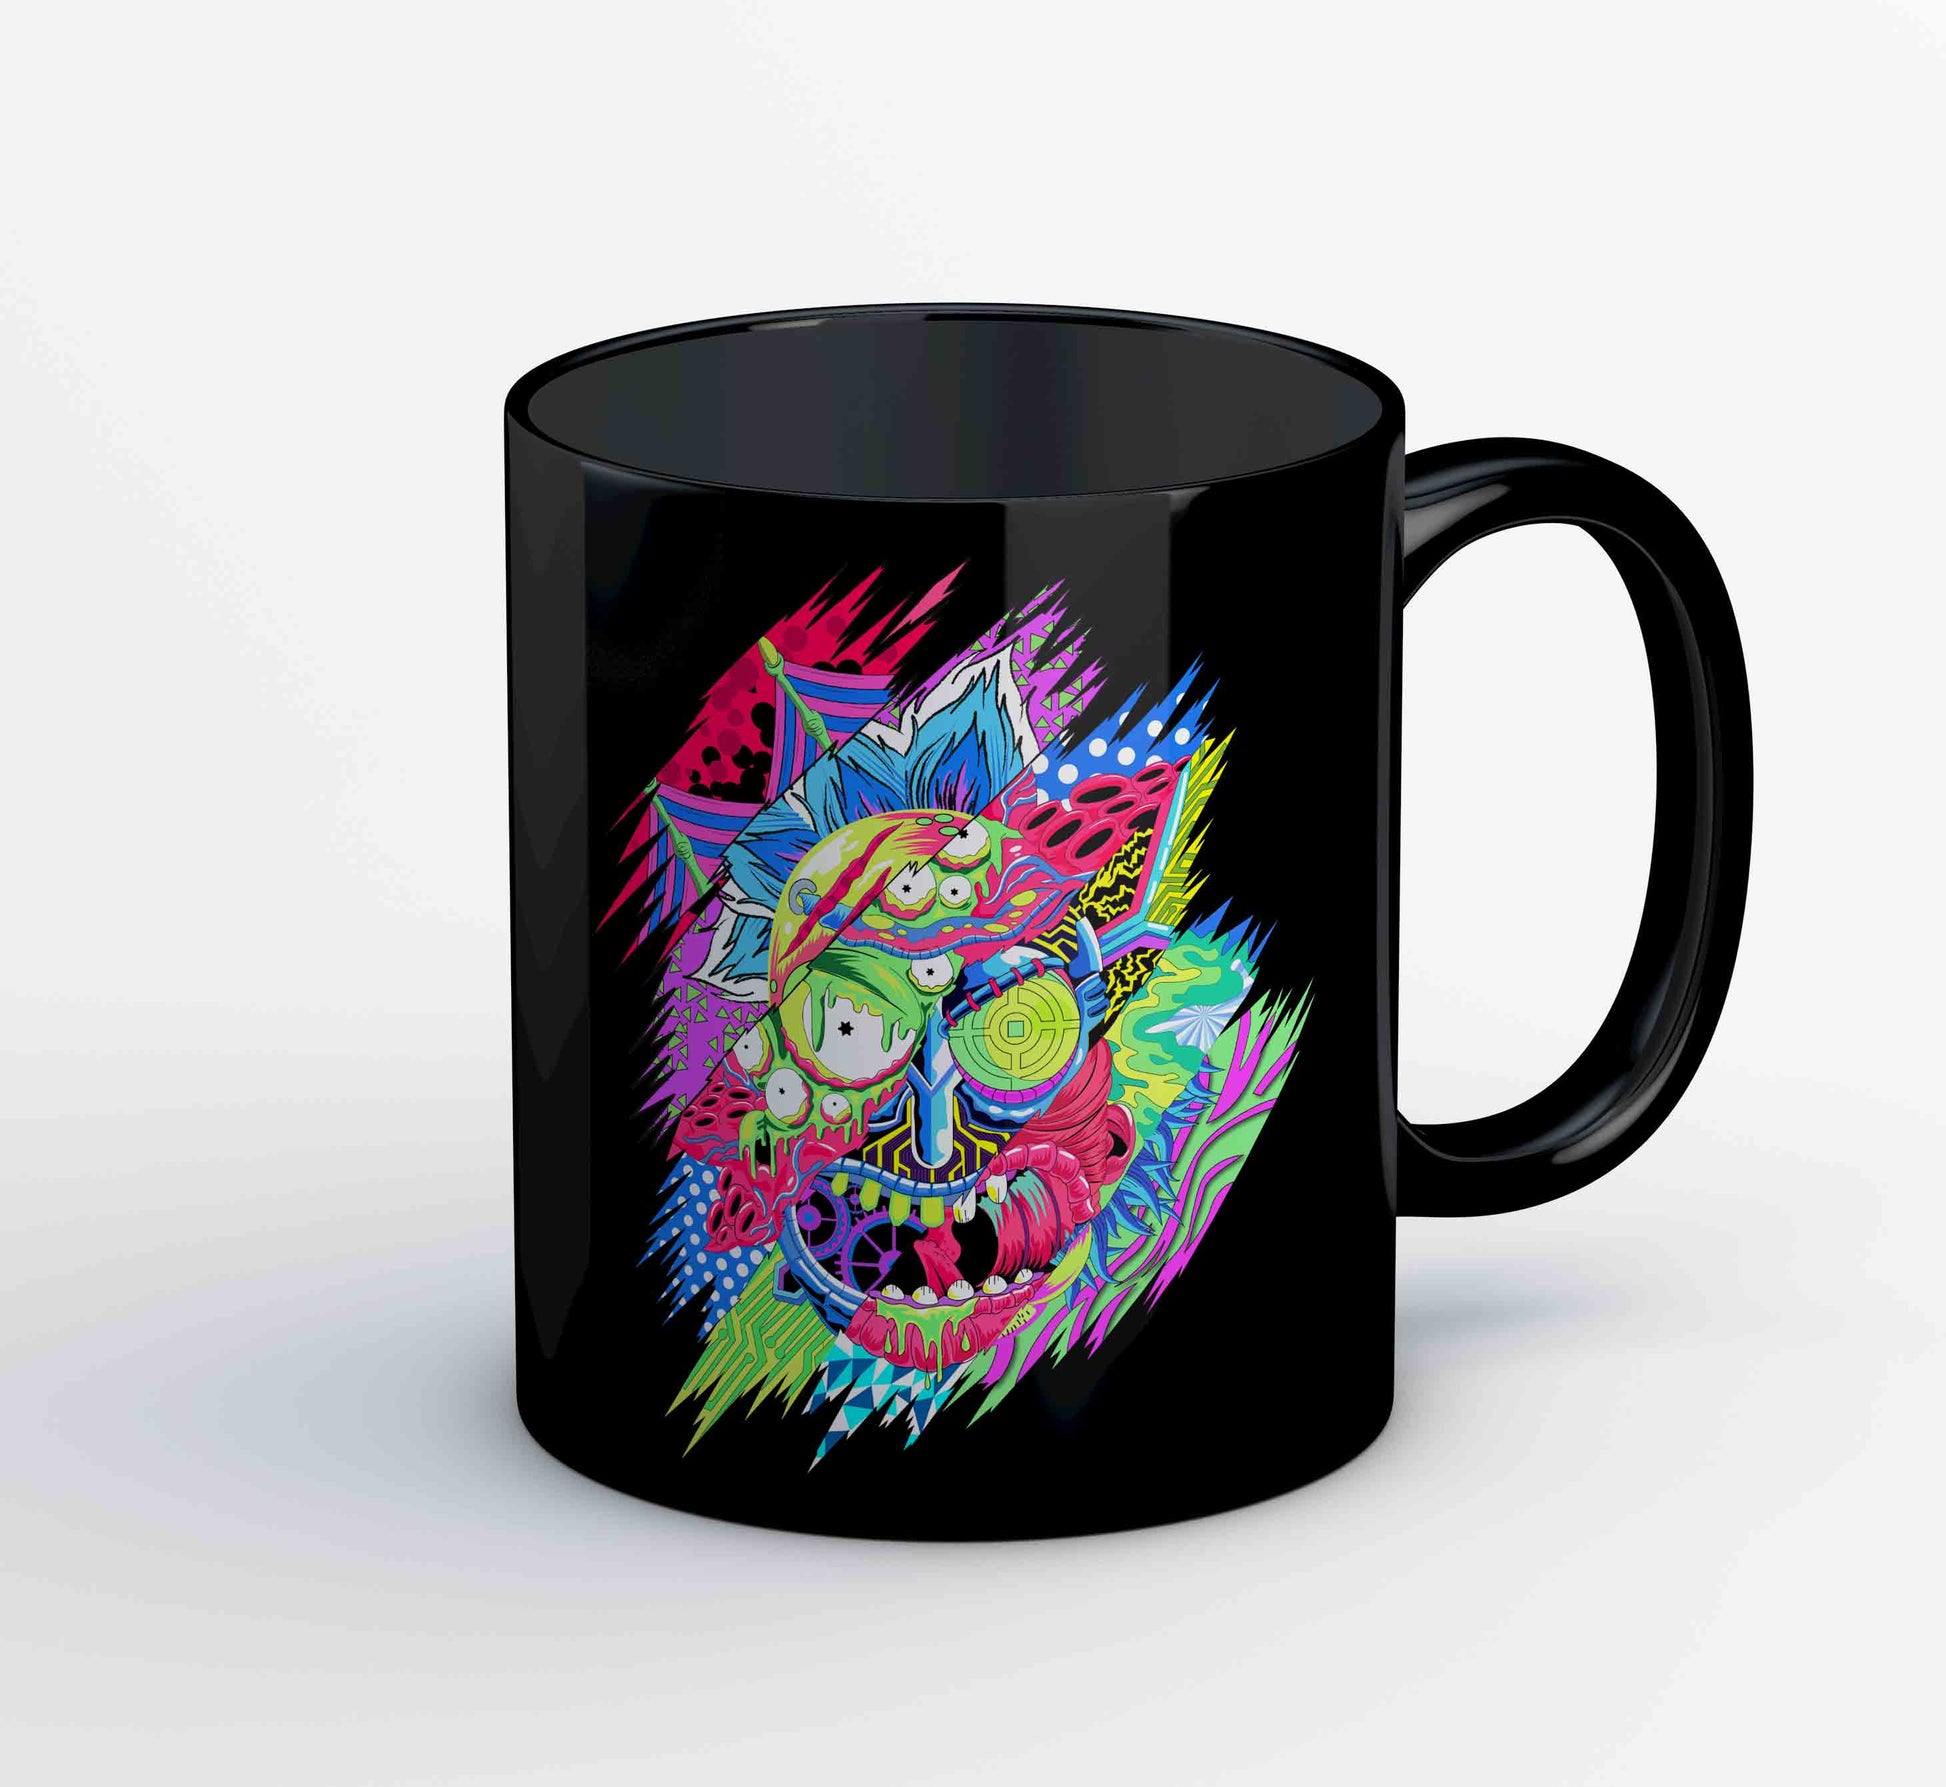 rick and morty fan art mug coffee ceramic buy online india the banyan tee tbt men women girls boys unisex  rick and morty online summer beth mr meeseeks jerry quote vector art clothing accessories merchandise